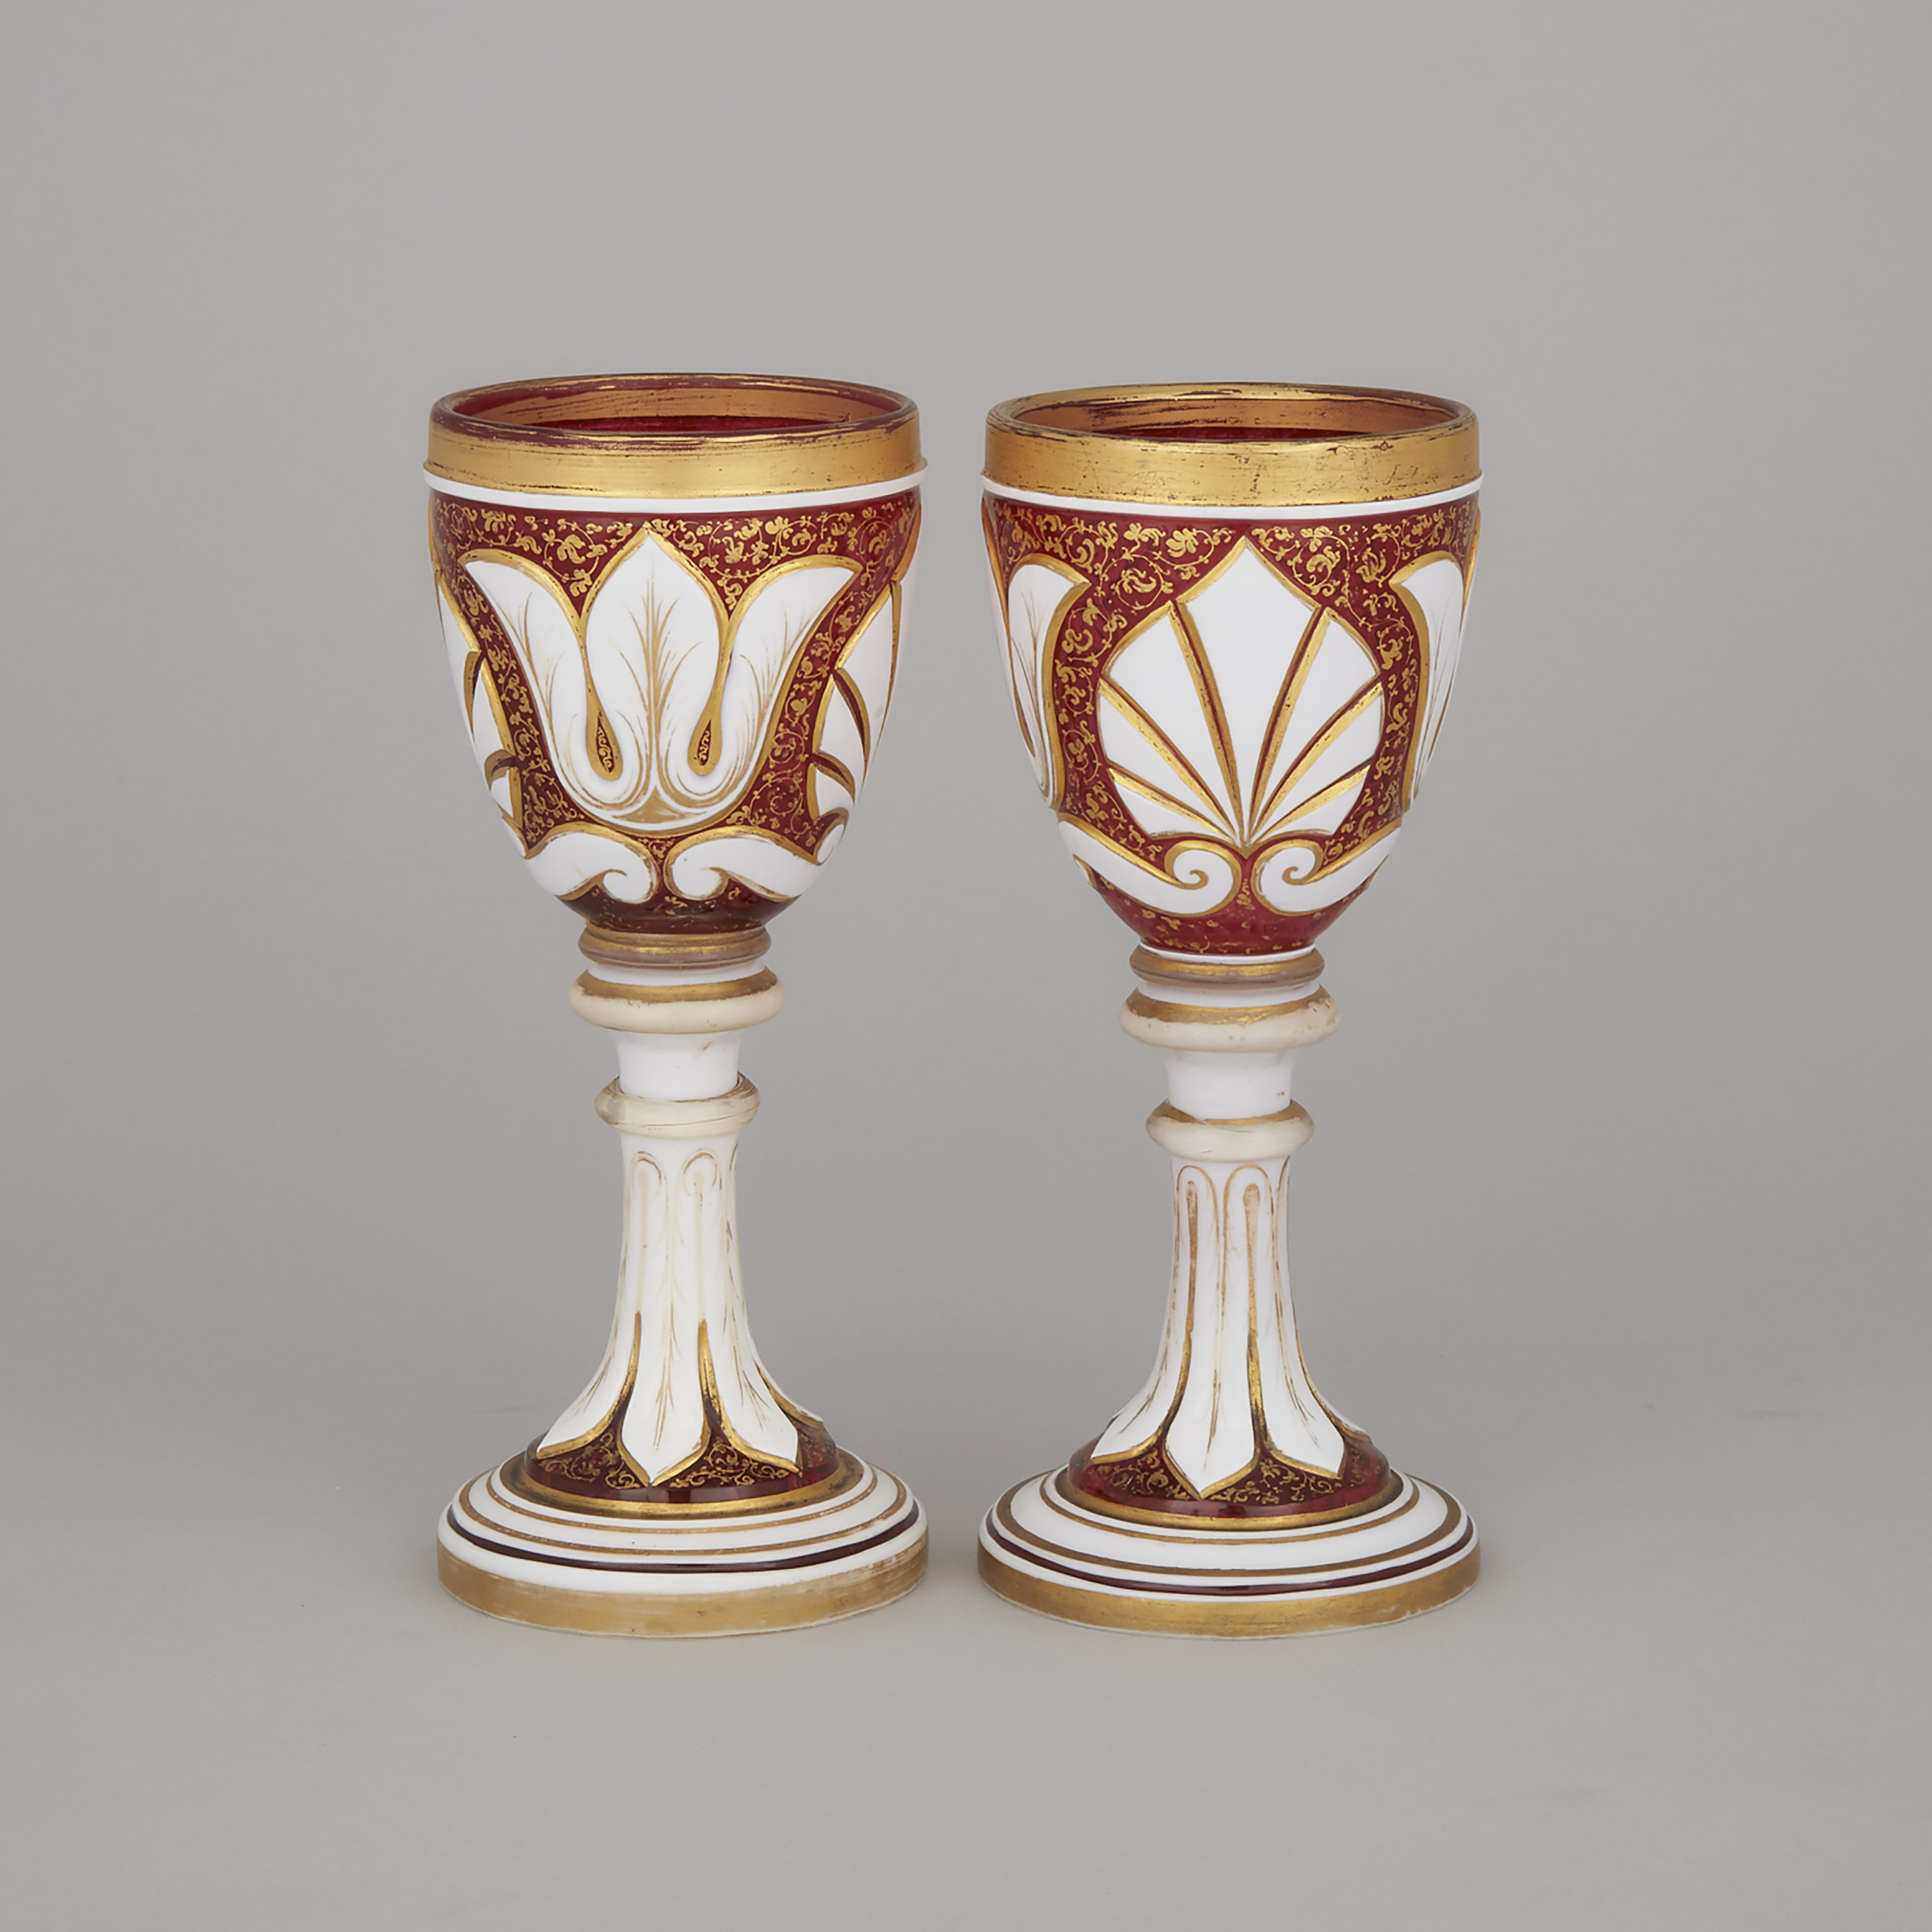 Pair of Bohemian Overlaid, Cut and Gilt Red Glass Goblets, late 19th century